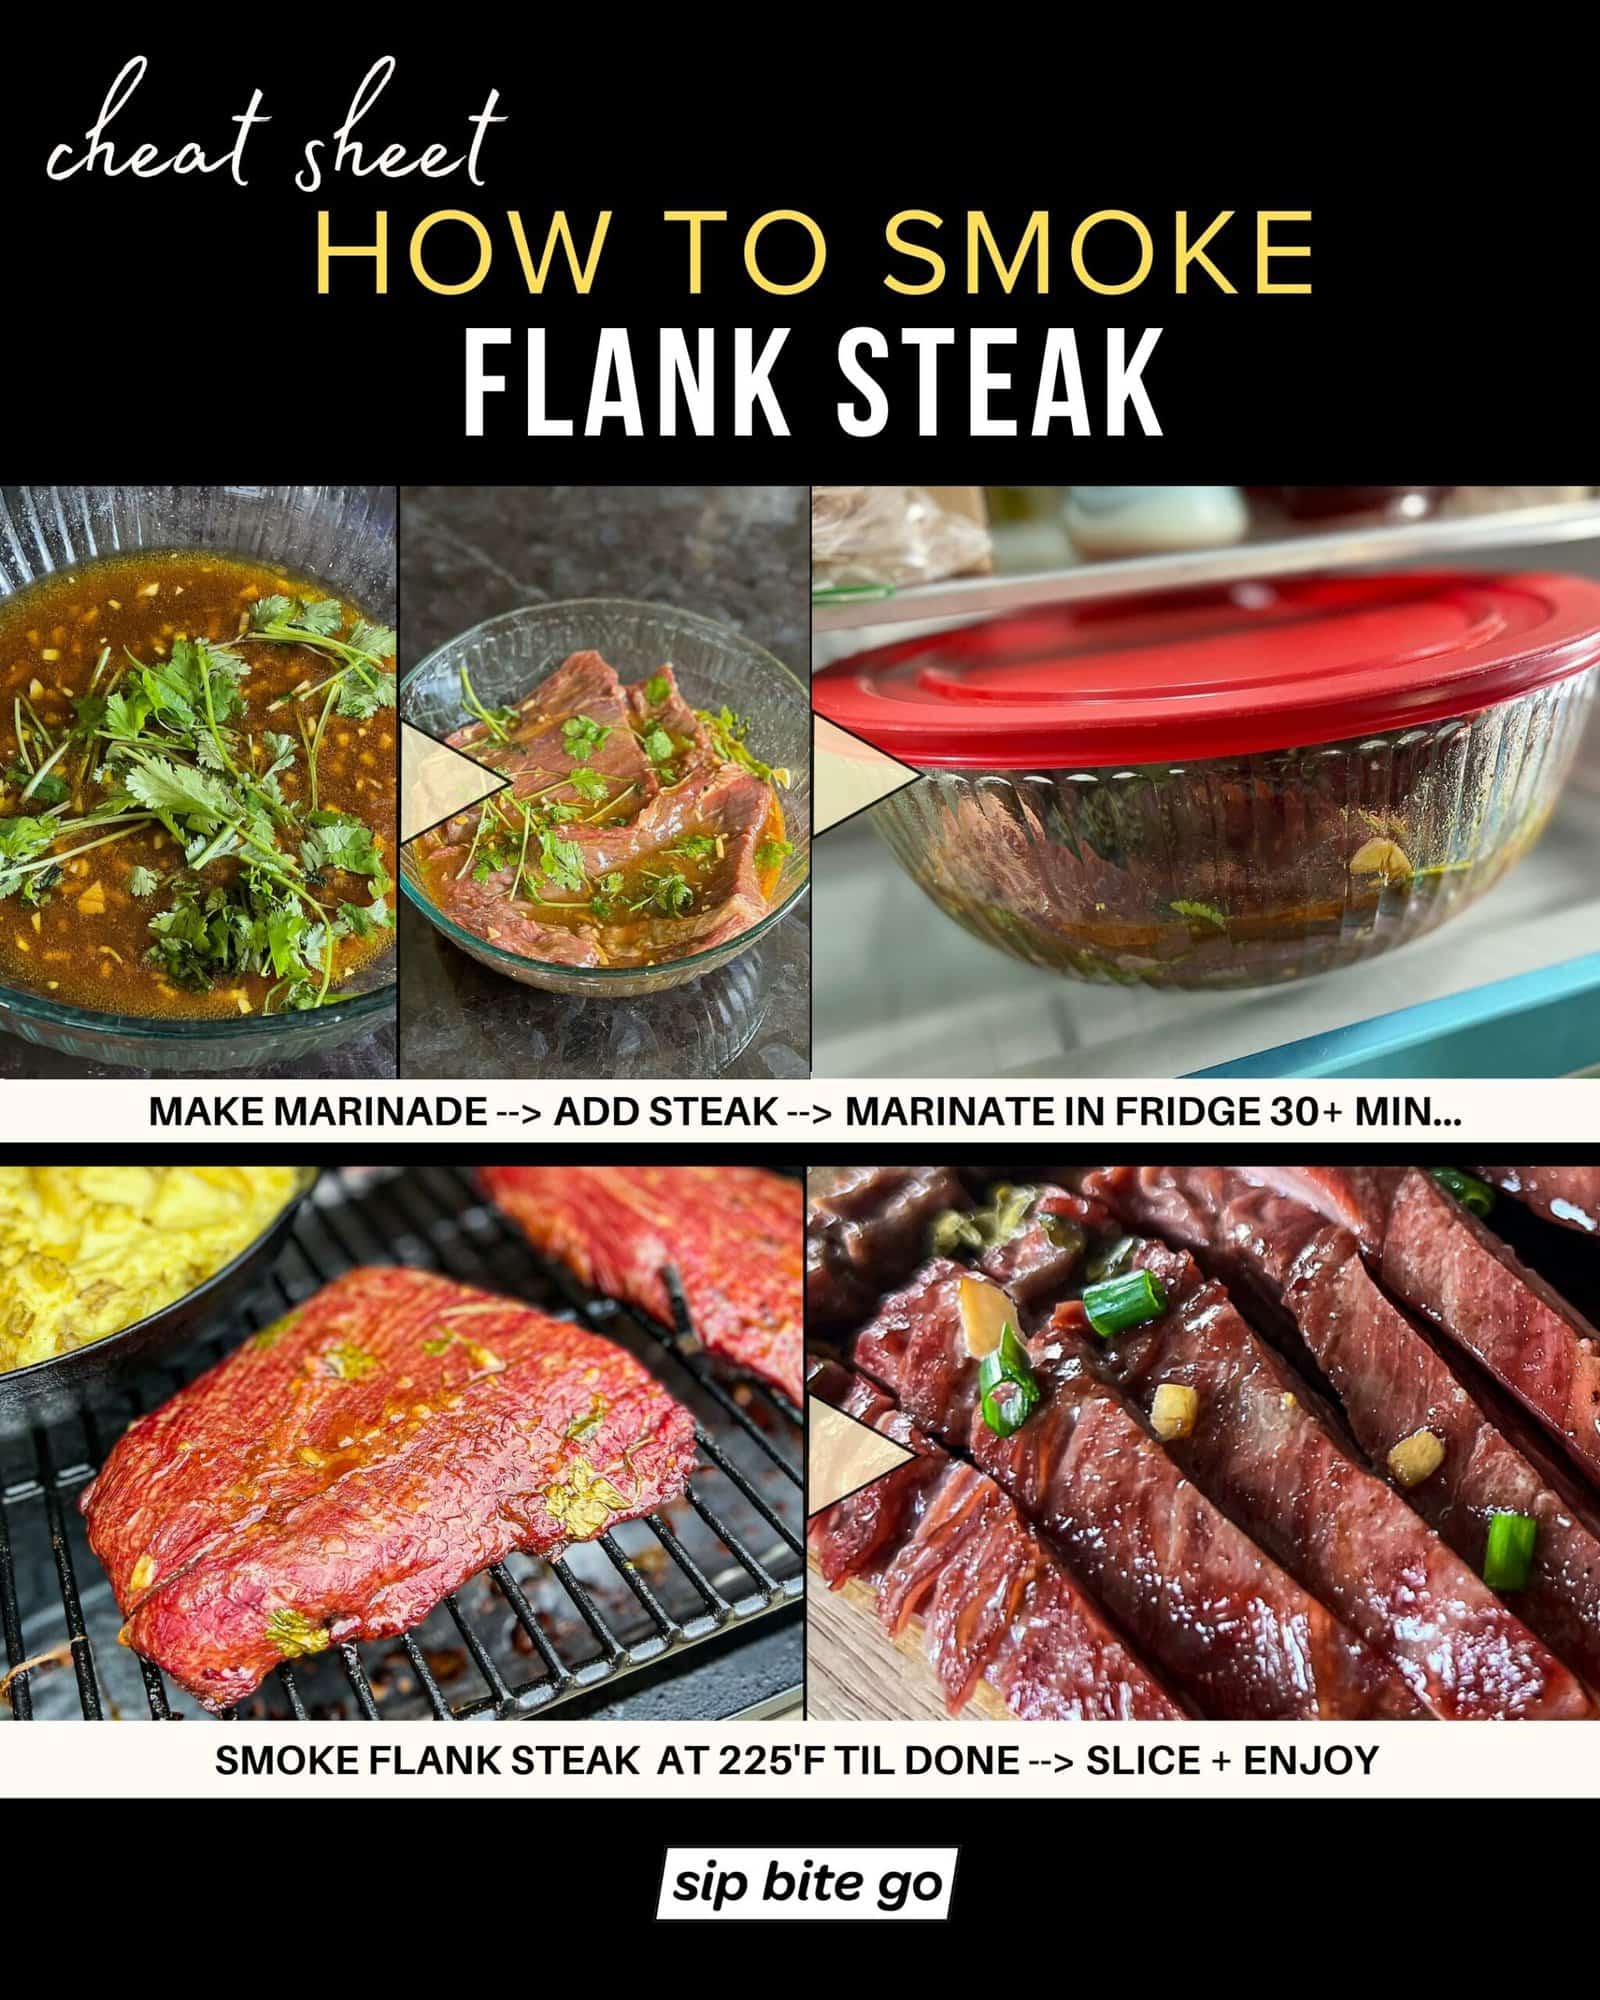 Infographic with recipe steps for smoking flank steak on Traeger pellet grill with captions